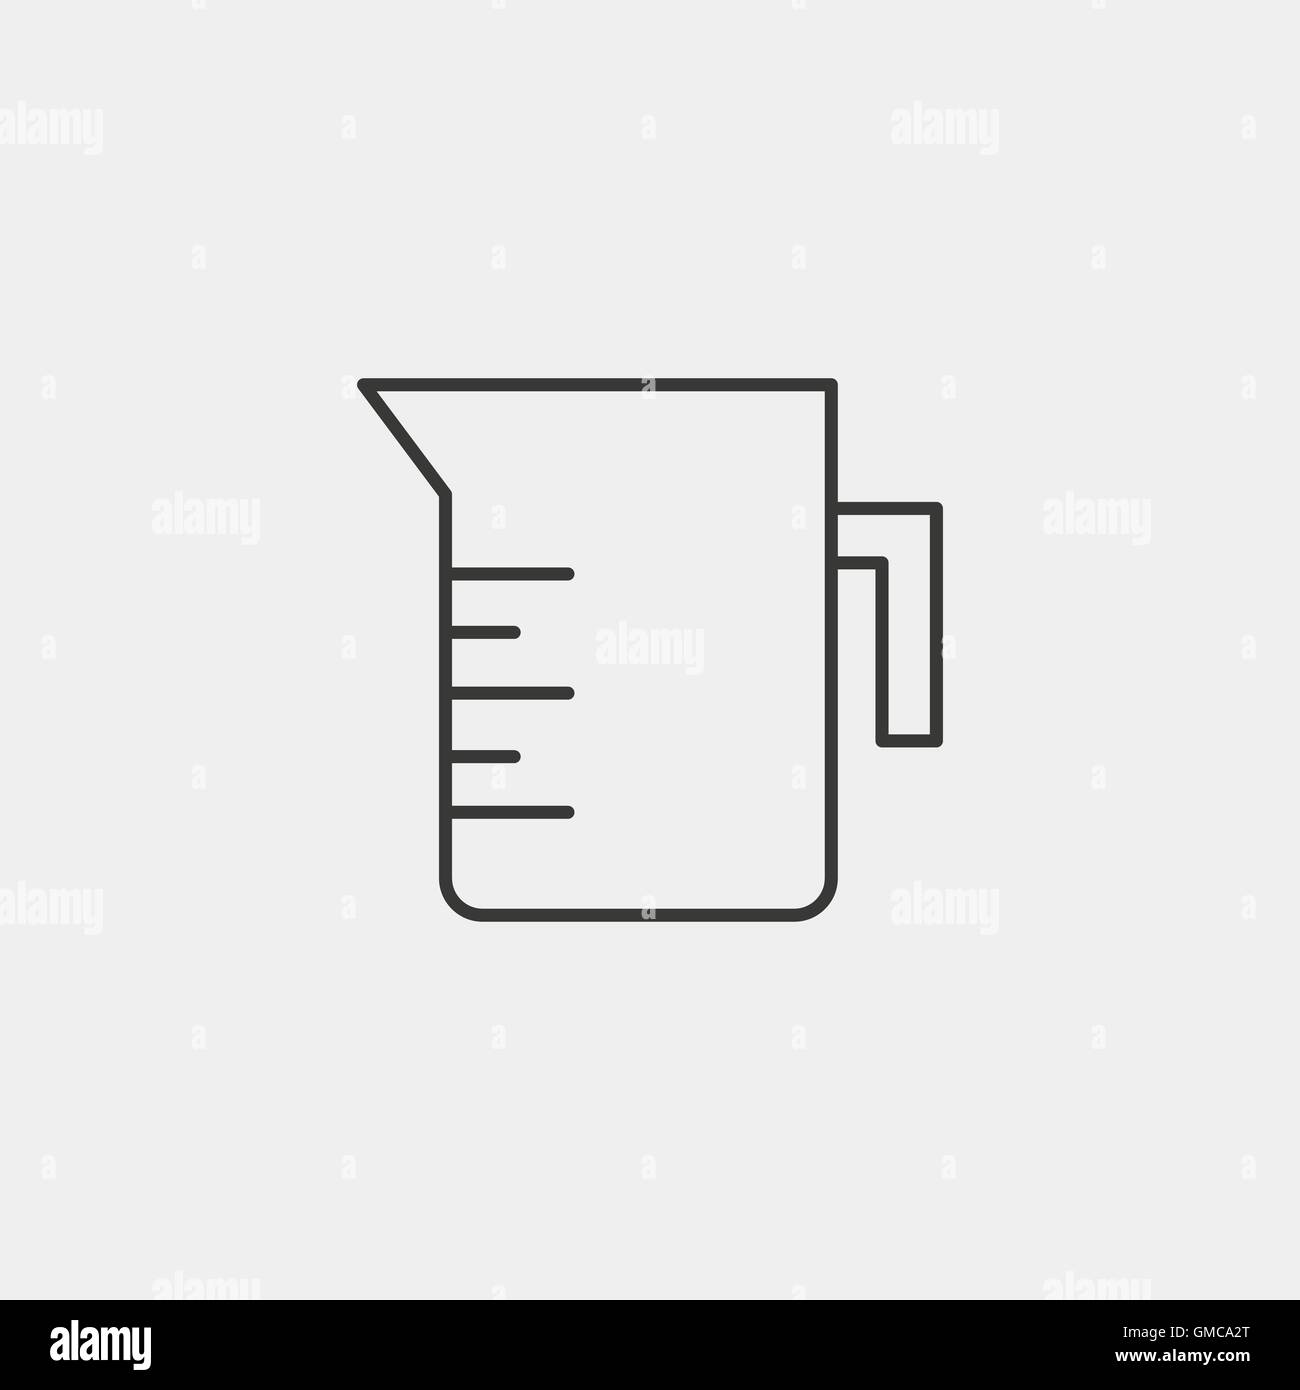 measuring jug icon of brown outline for illustration Stock Vector